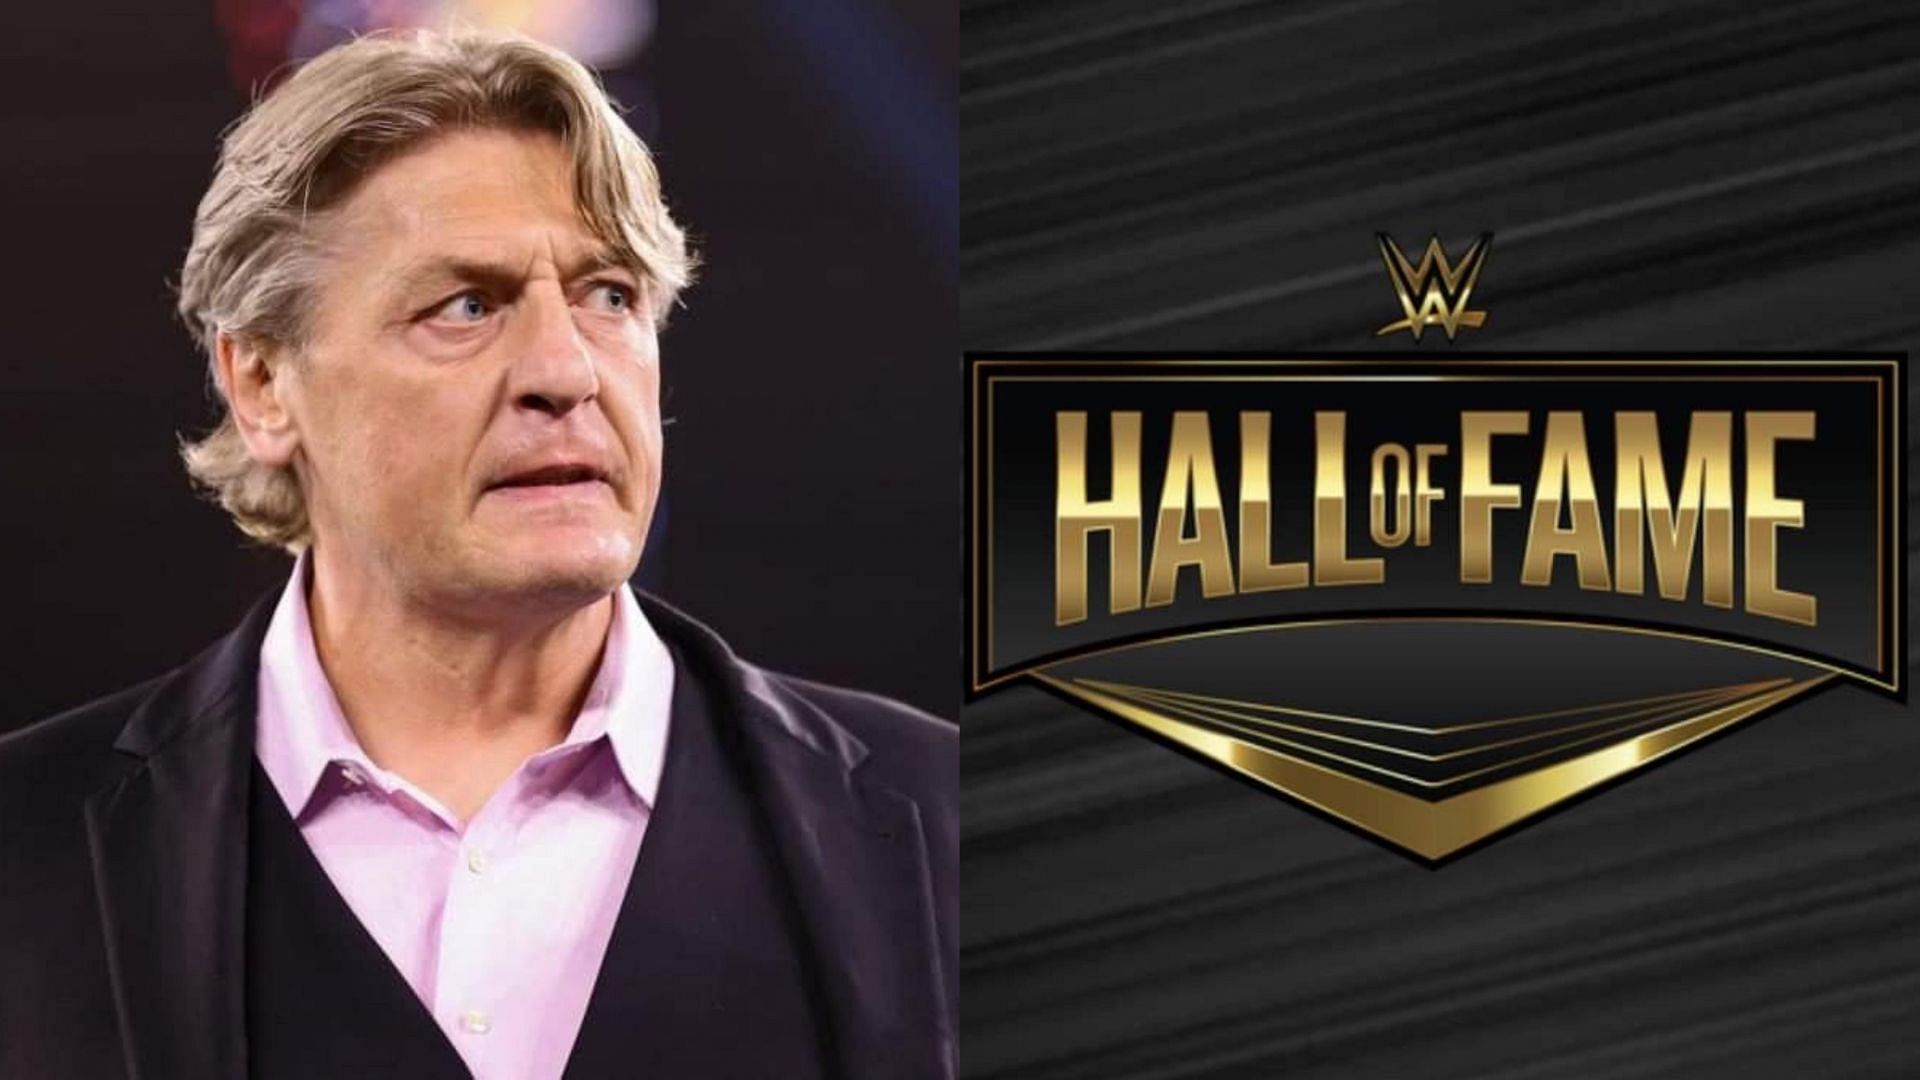 William Regal is reportedly on his way back to WWE